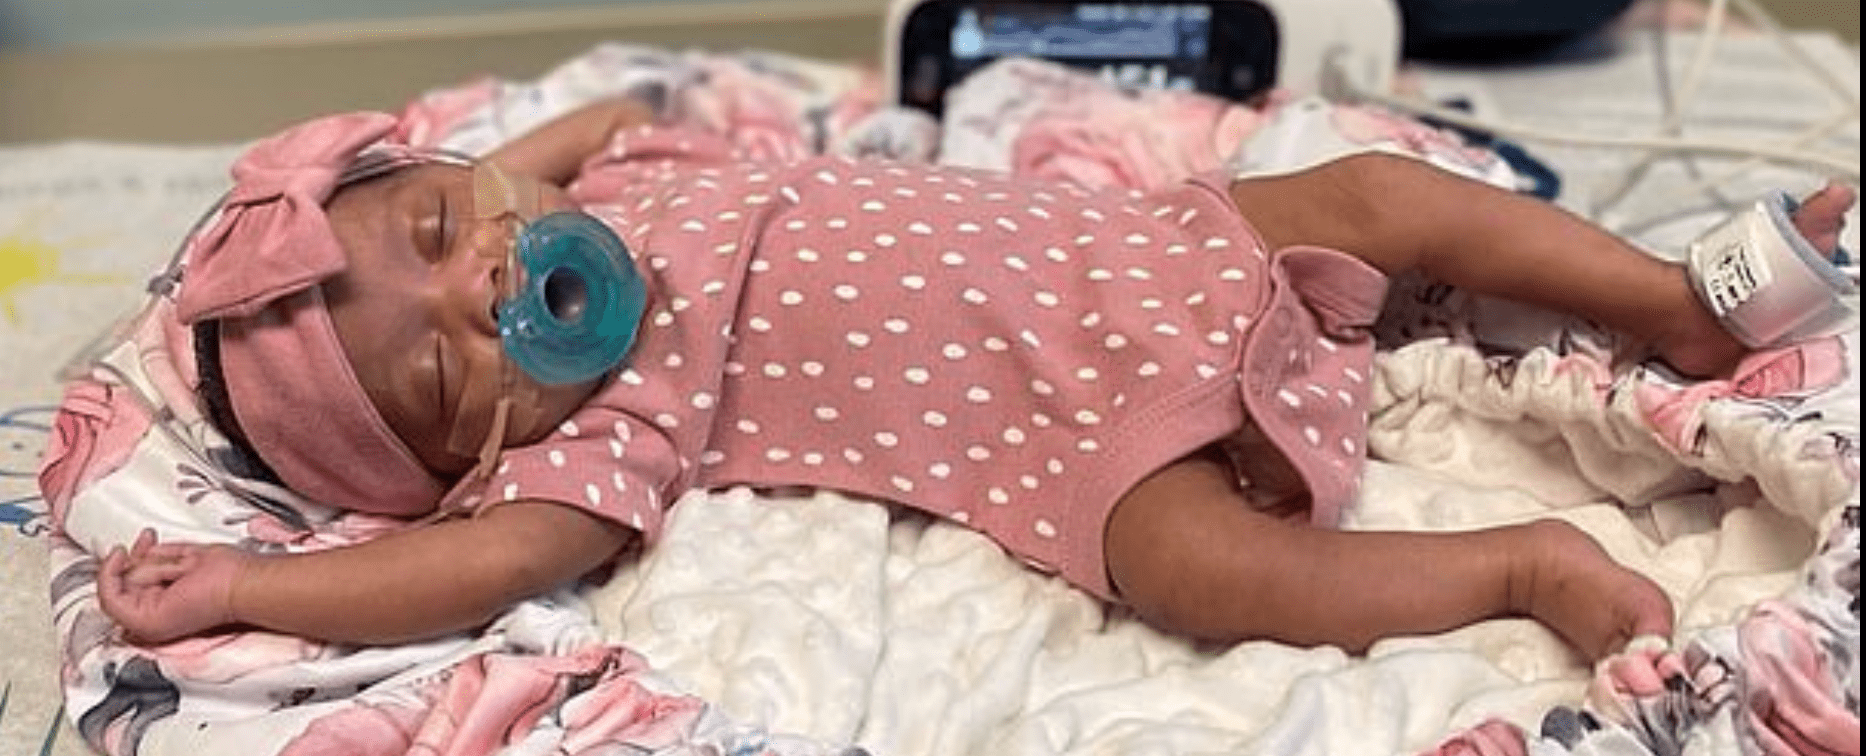 A girl who underwent a world-first brain operation while still inside her mother’s womb at the age of eight weeks is reportedly “thriving” after receiving treatment for a fatal genetic disease before birth.